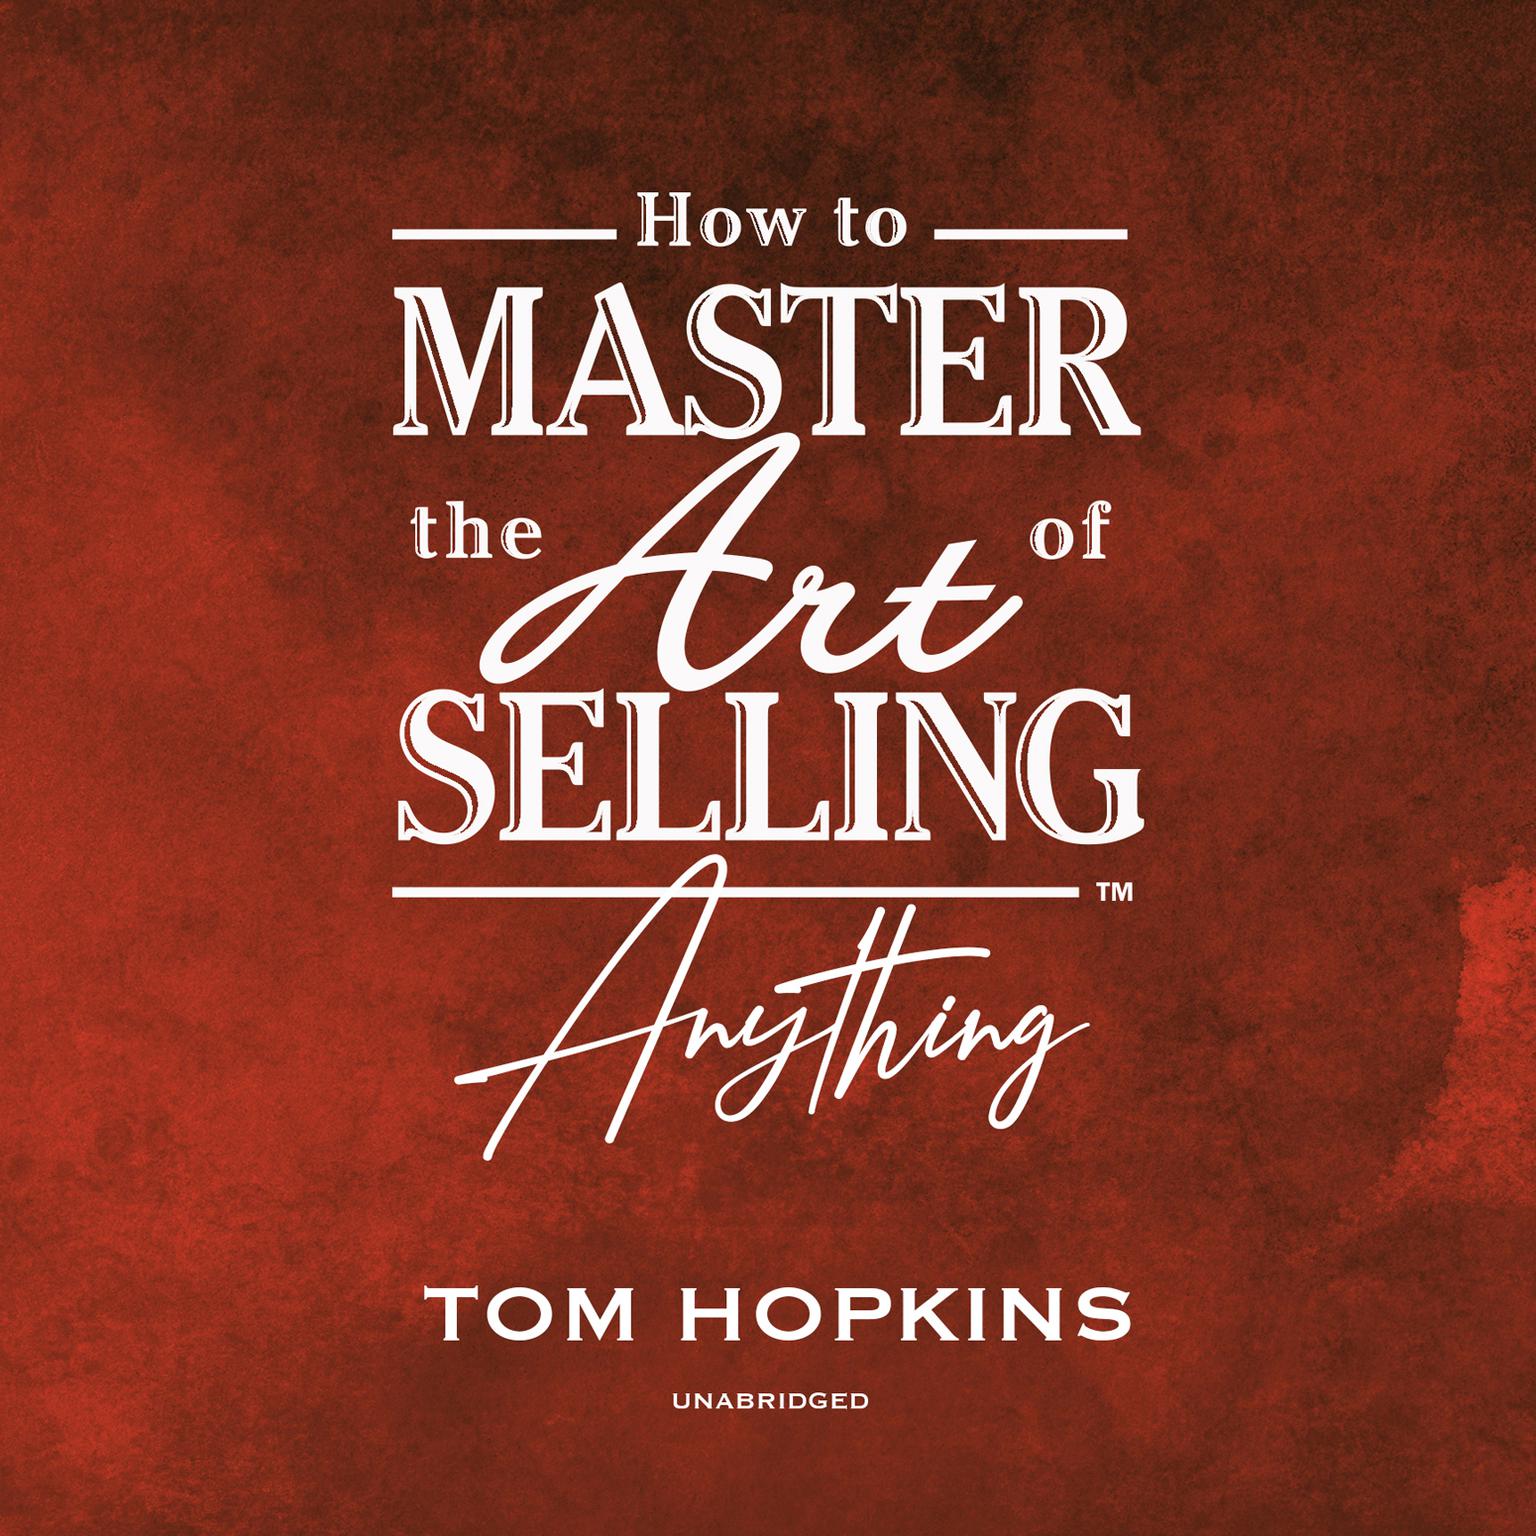 How to Master the Art of Selling Anything Program Audiobook, by Tom Hopkins